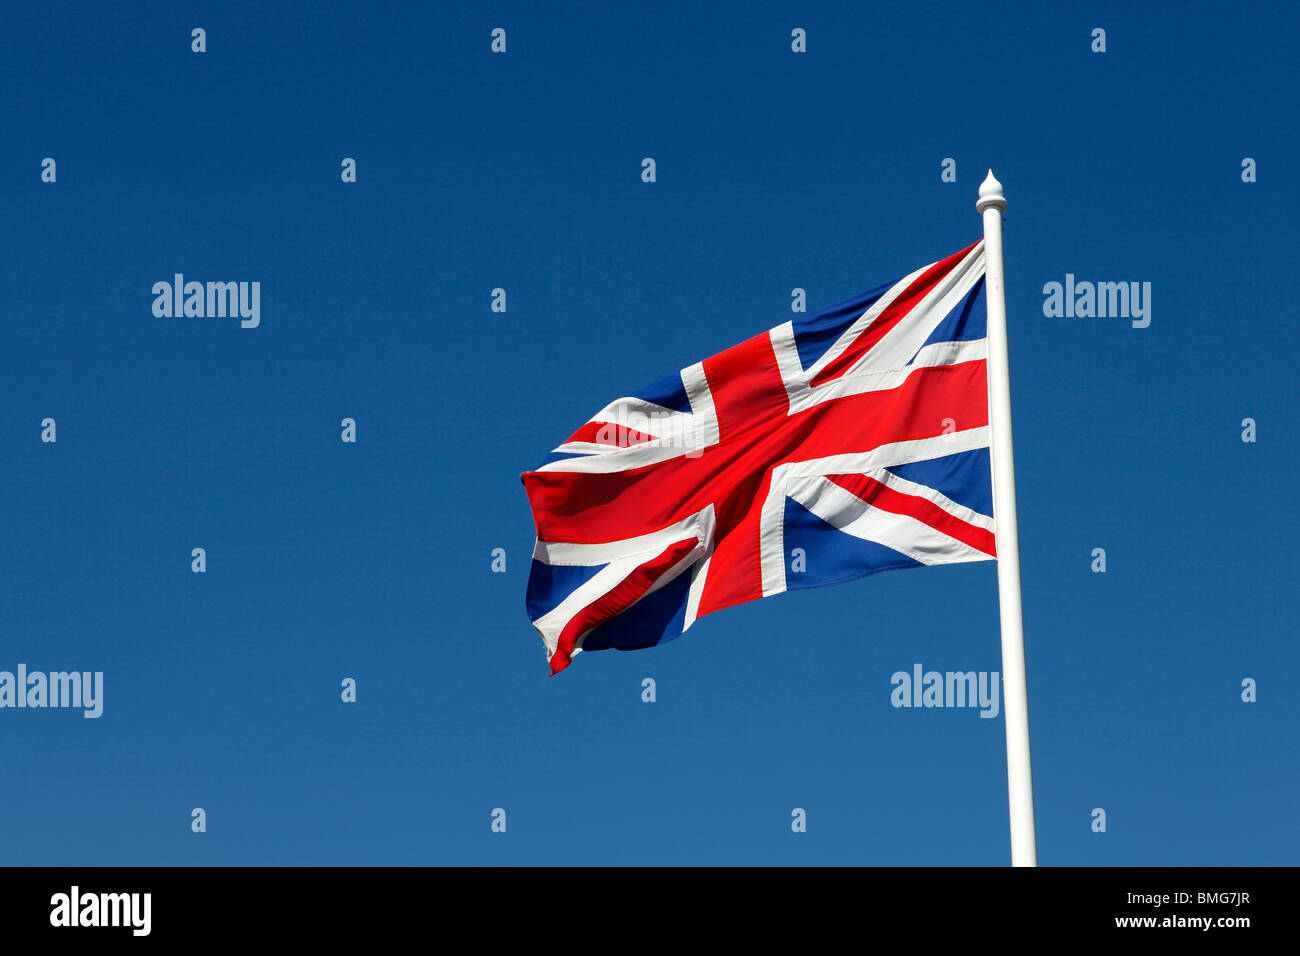 The Union Flag, often called the Union Jack, of the United Kingdom of Great Britain and Northern Ireland. Stock Photo